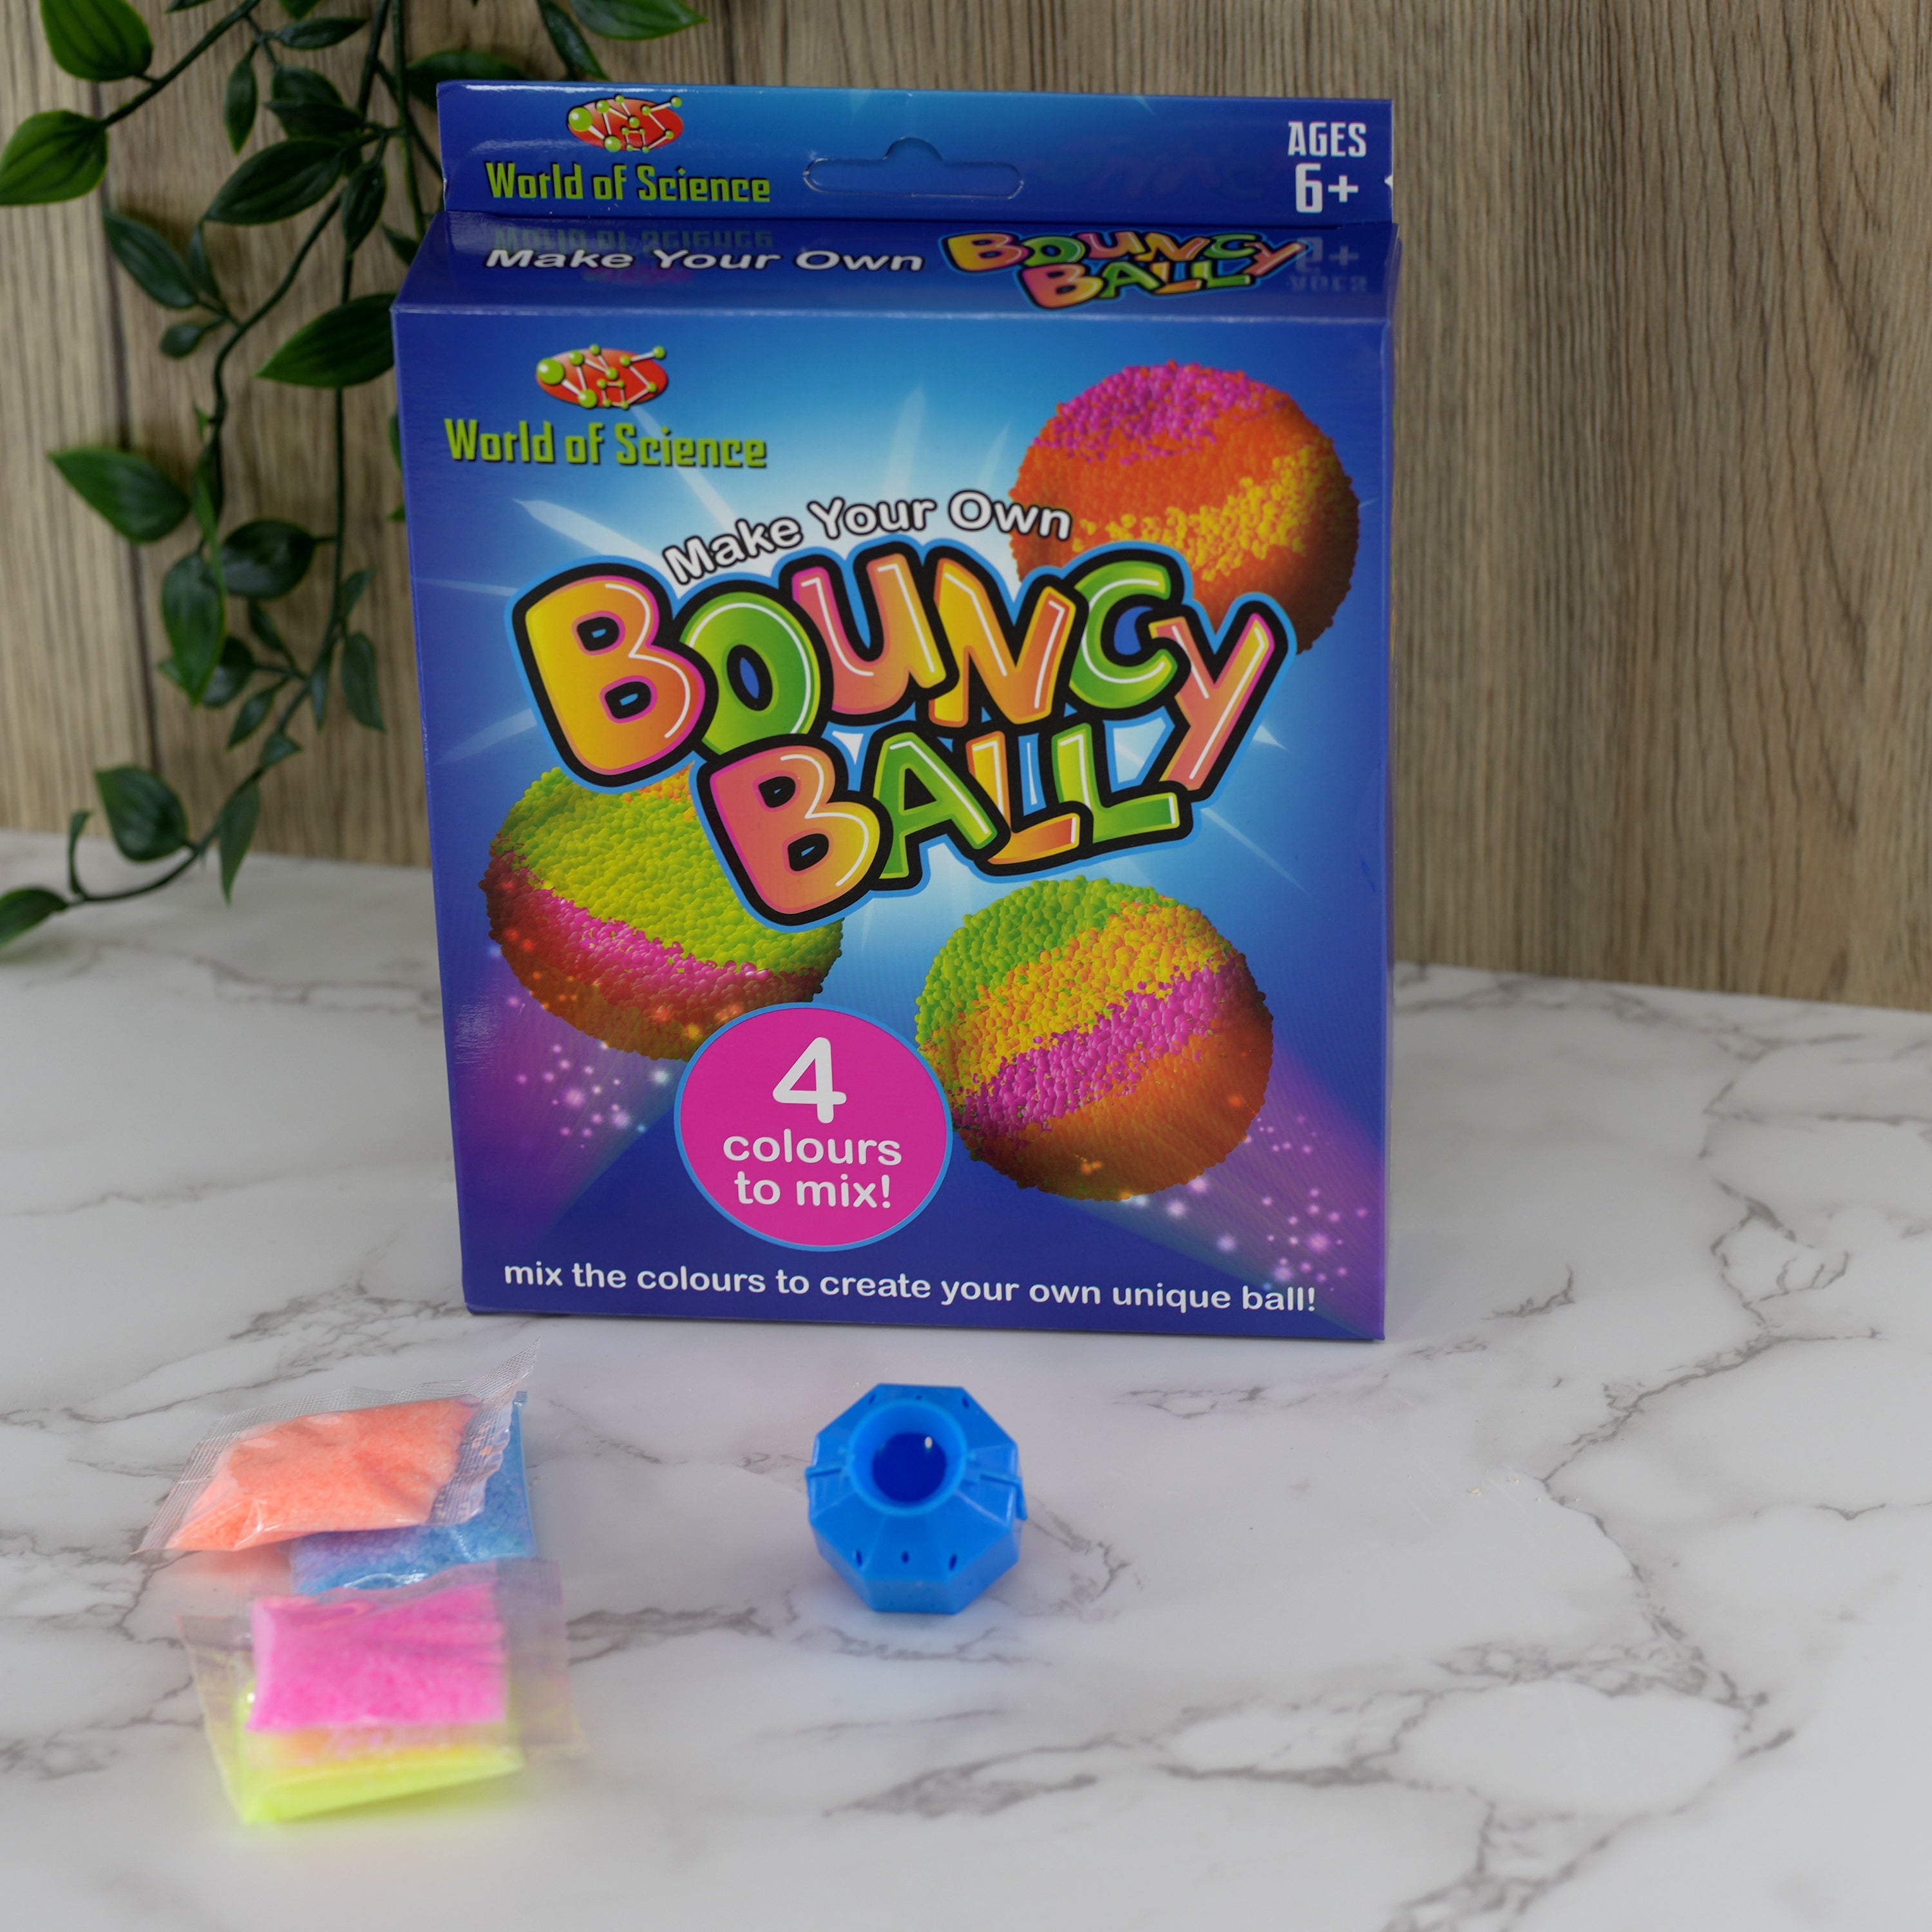 Make Your Own Bouncy Ball Kids Art Craft Set The Magic Toy Shop - The Magic Toy Shop